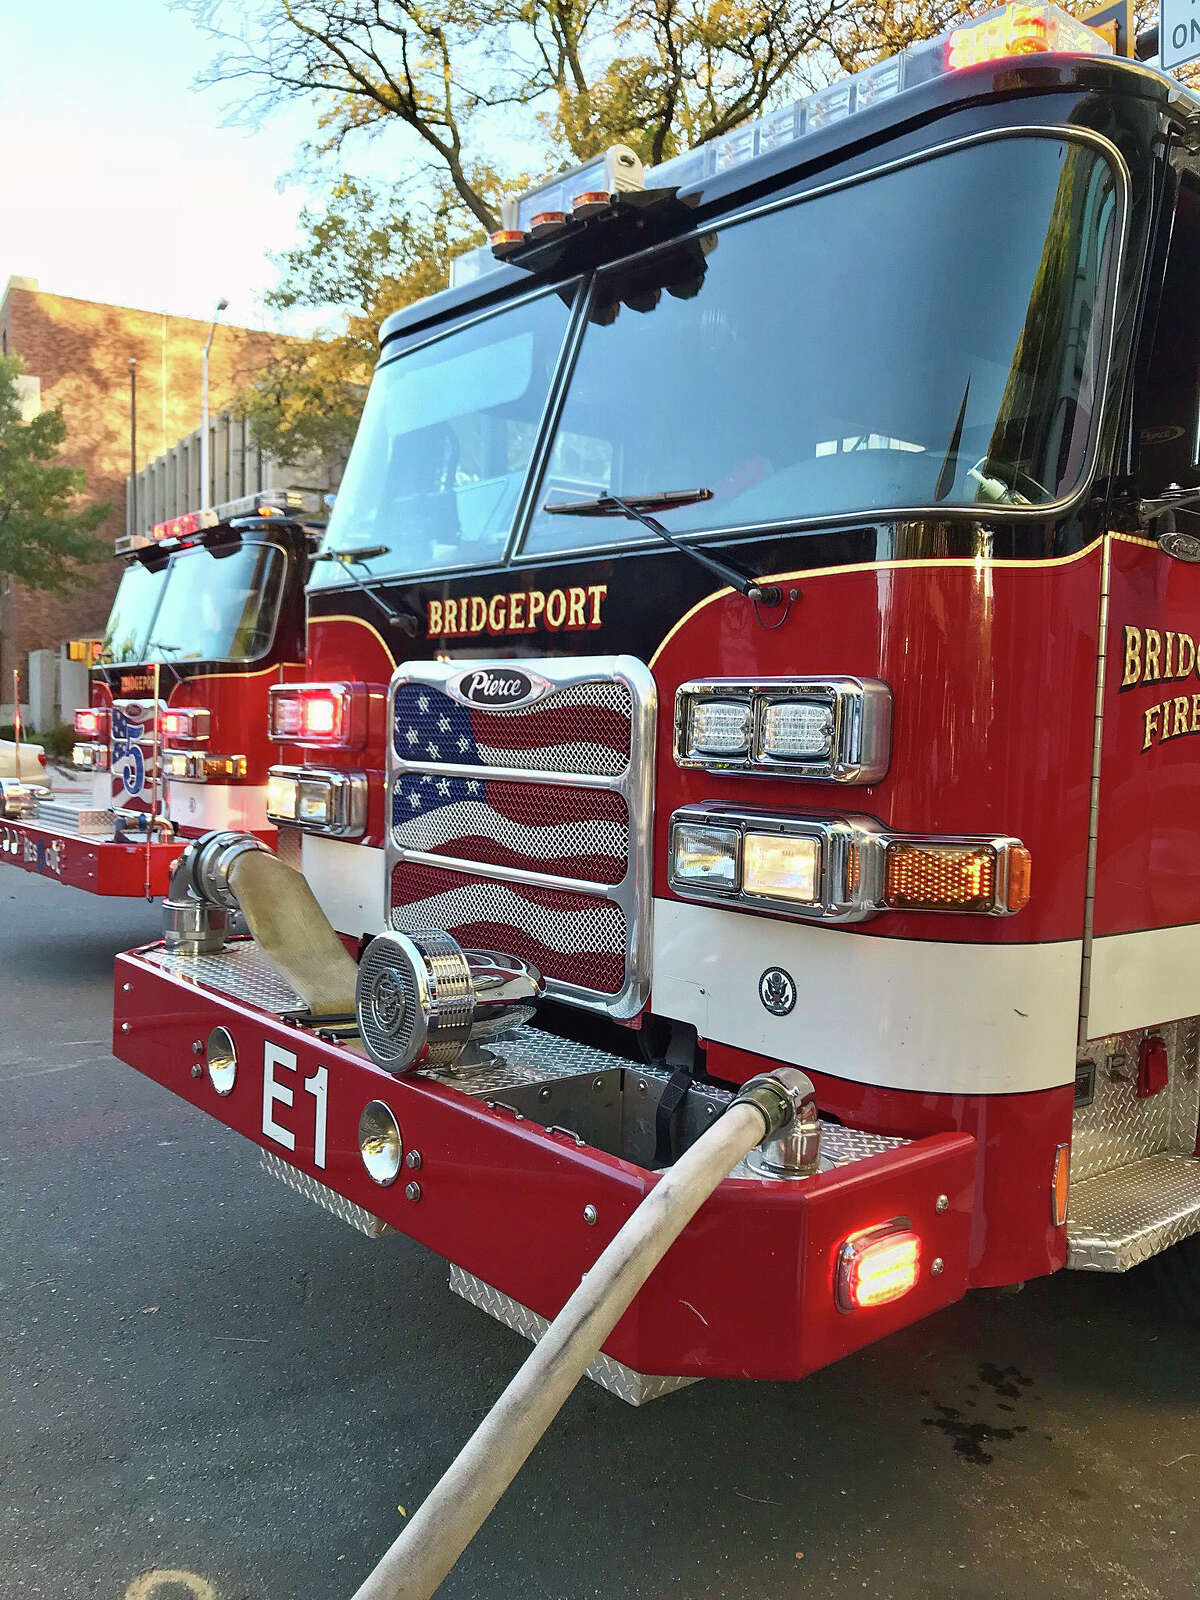 A fire at a three-story multi-family home on Seaview Avenue in Bridgeport Thursday afternoon left nine adults displaced, according to Bridgeport fire officials.